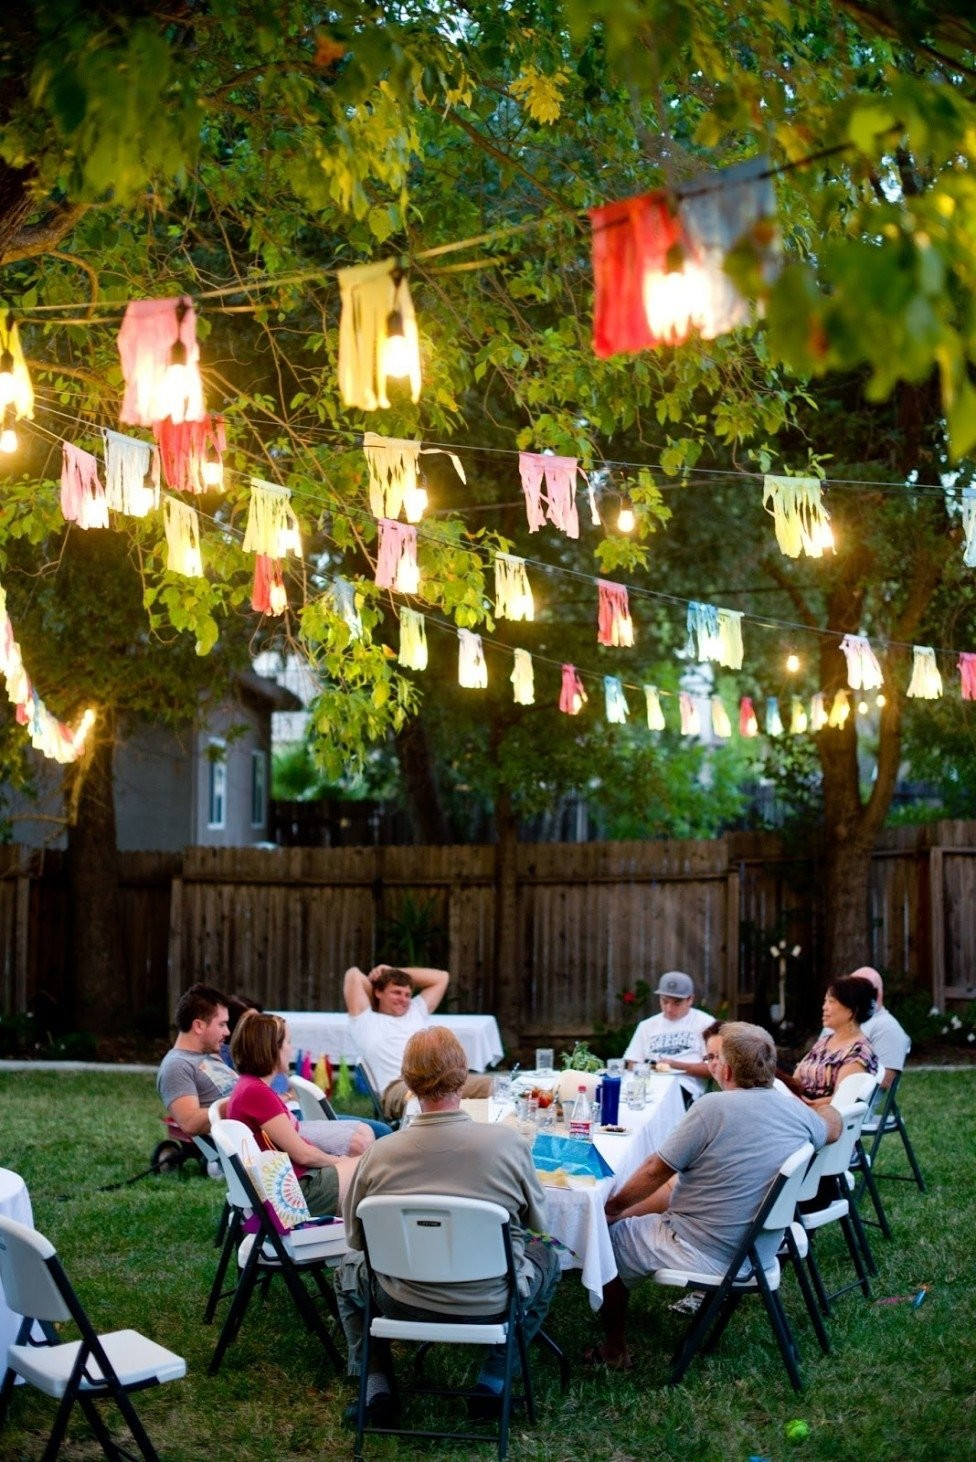 Backyard Party Decorating Ideas Pinterest
 10 Famous Outdoor Birthday Party Ideas For Adults 2019